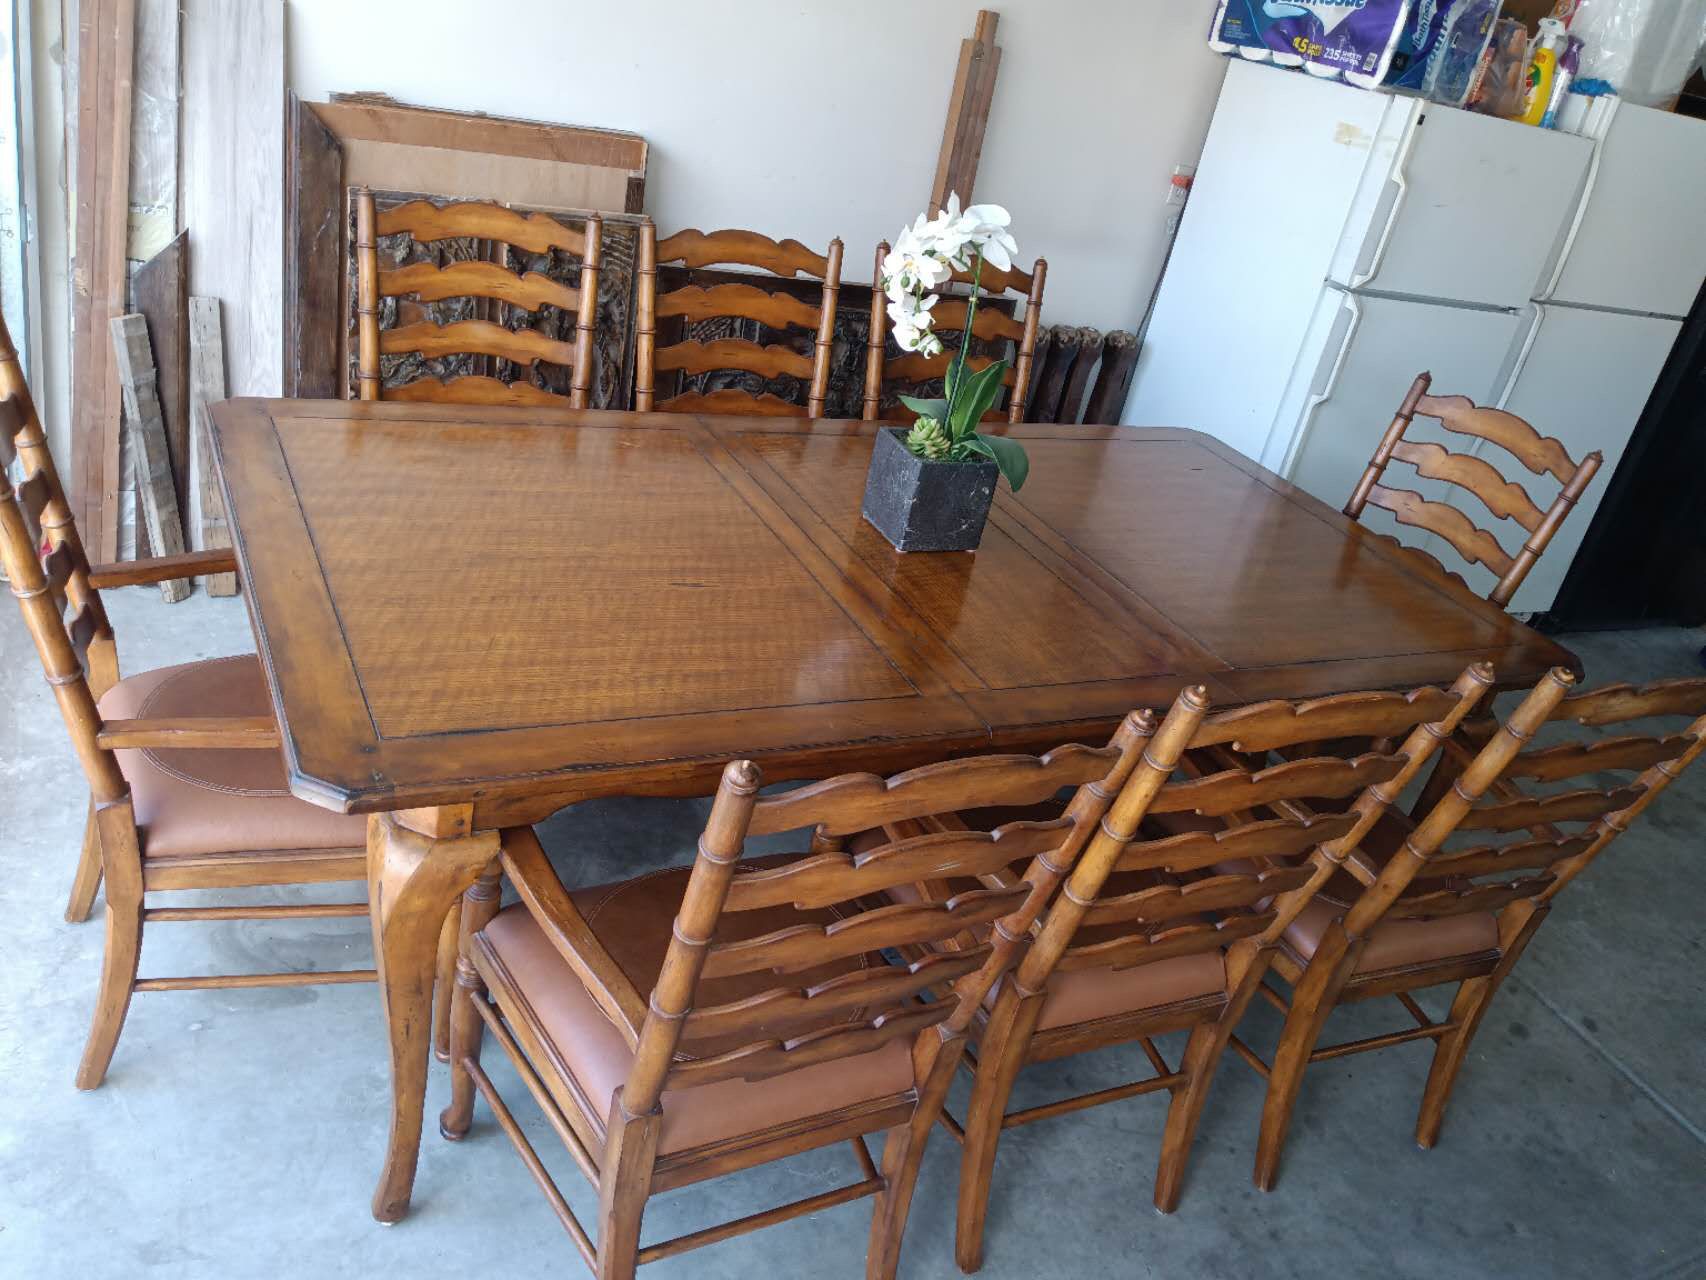 Dining table w/ 8 Chairs